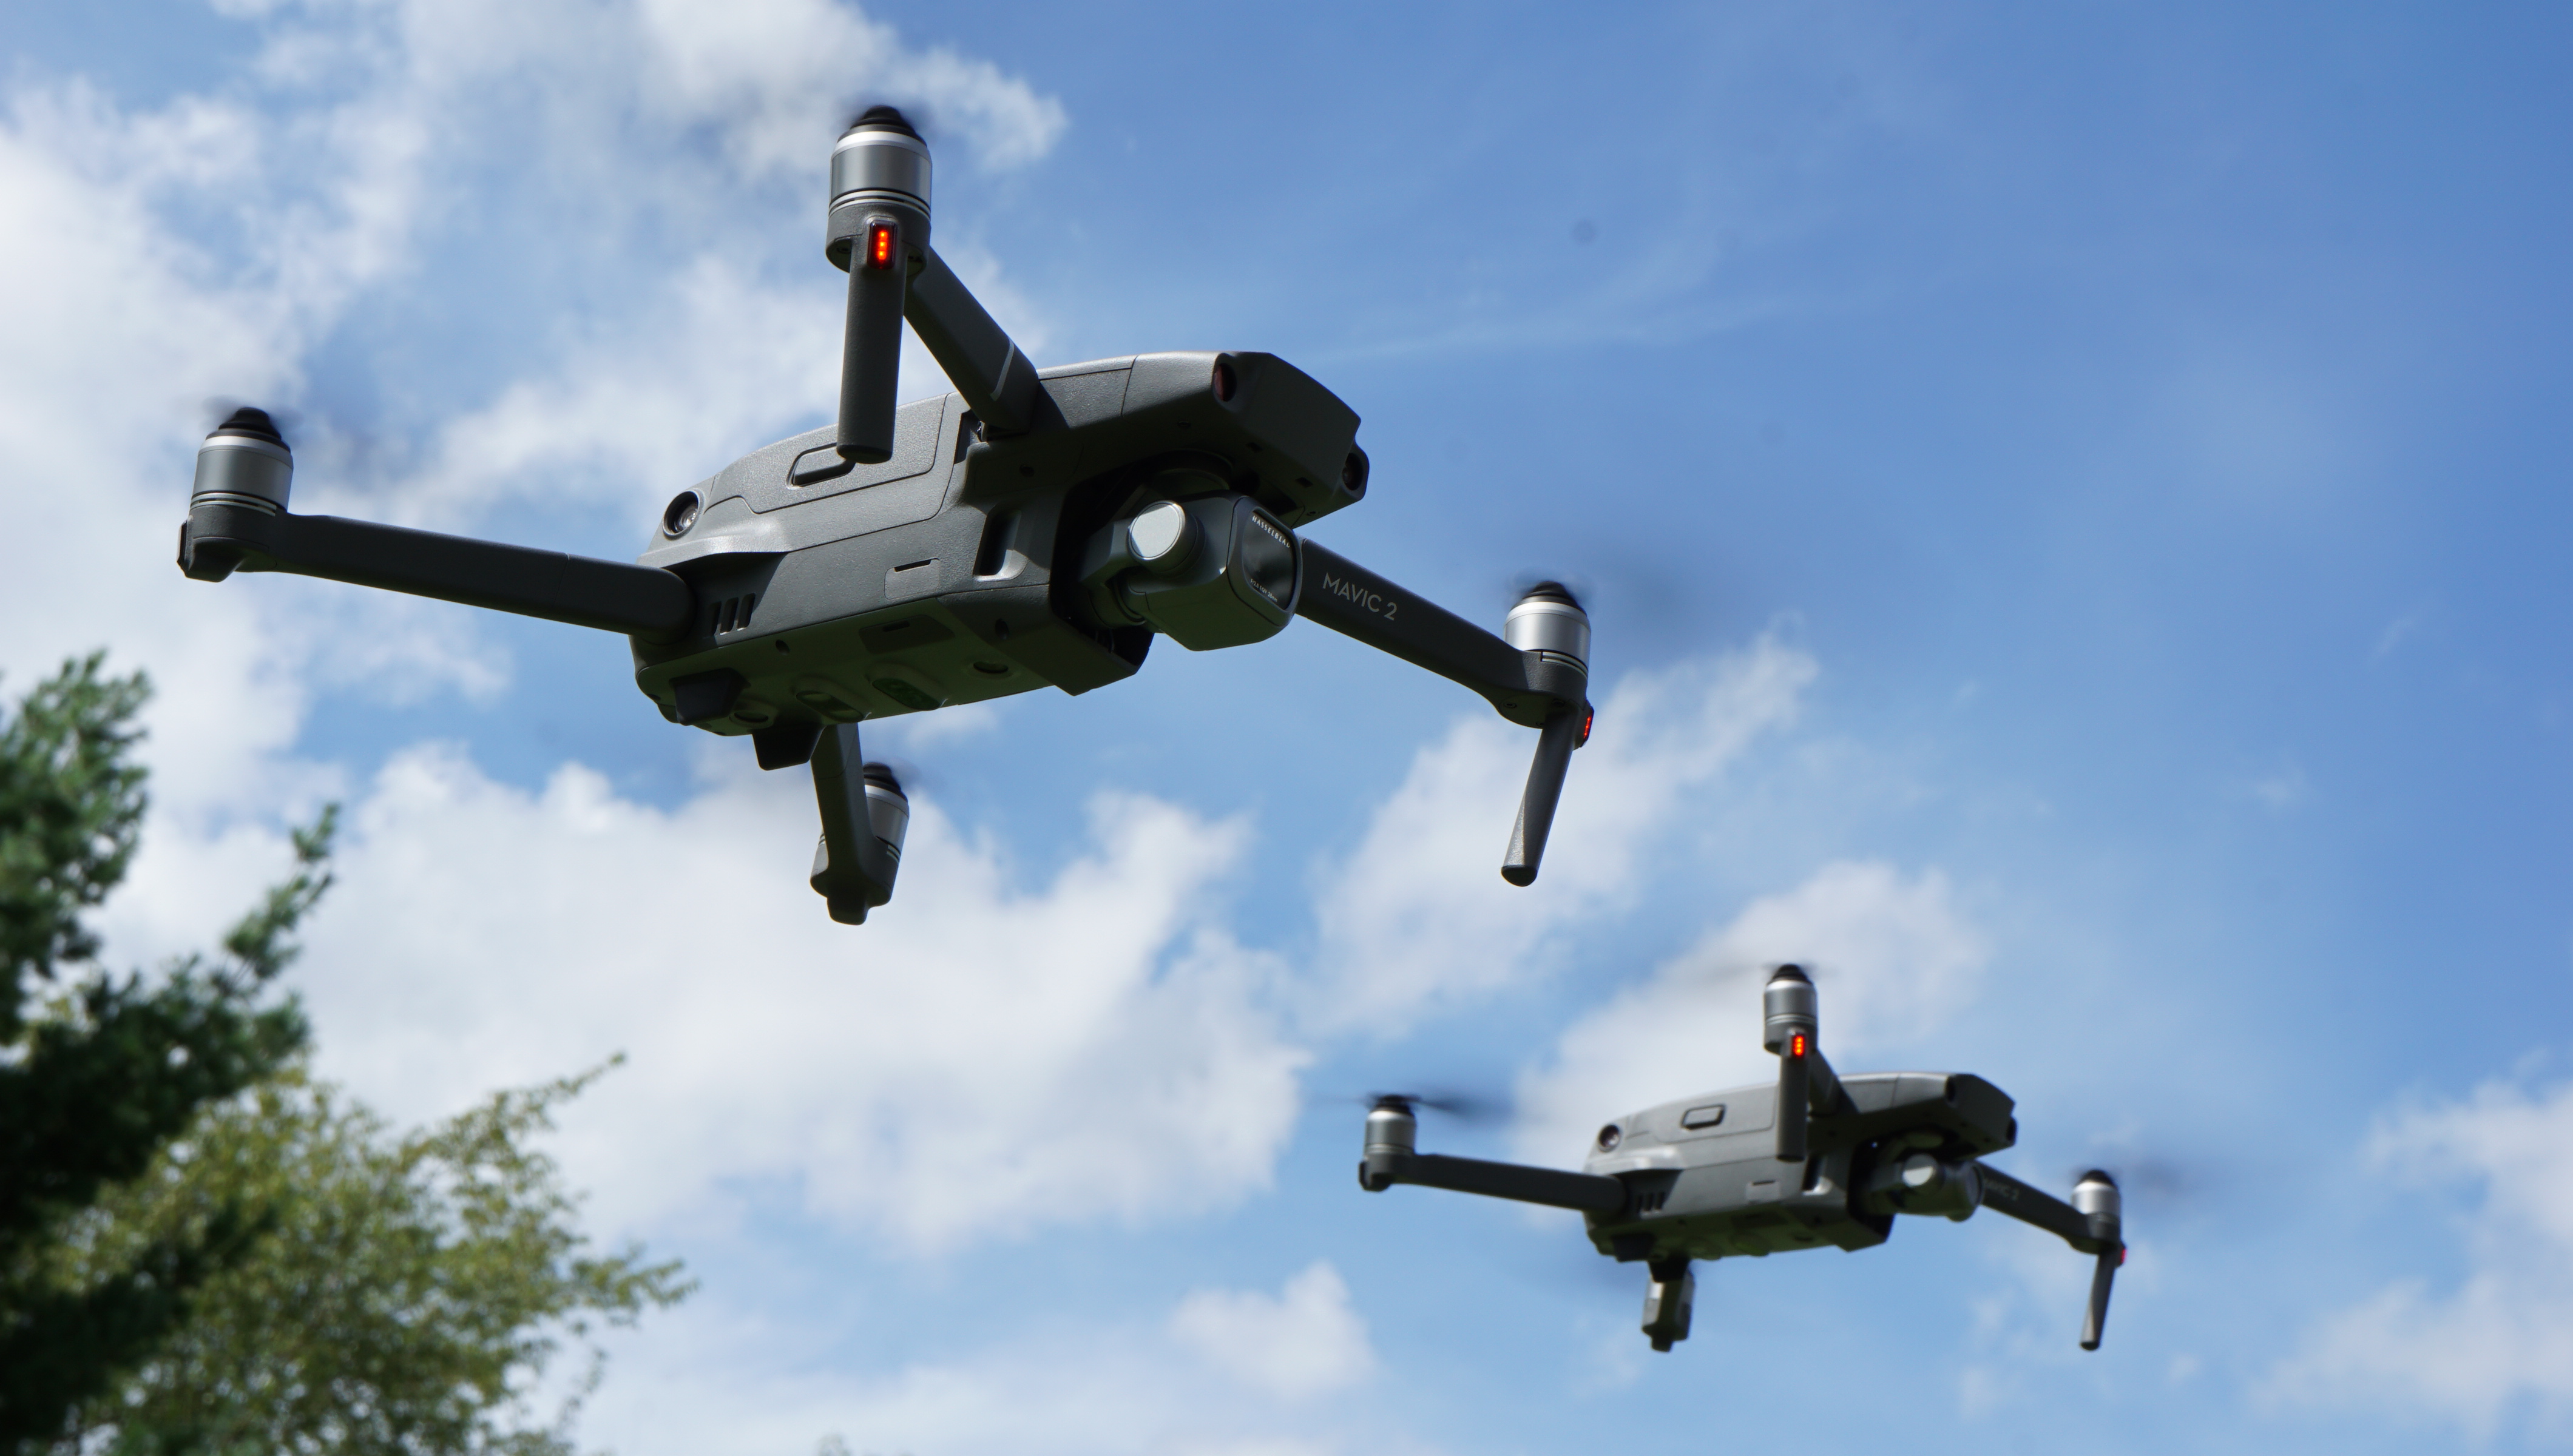 The DJI Mavic 2 Pro and Zoom drones are covered in sensors and